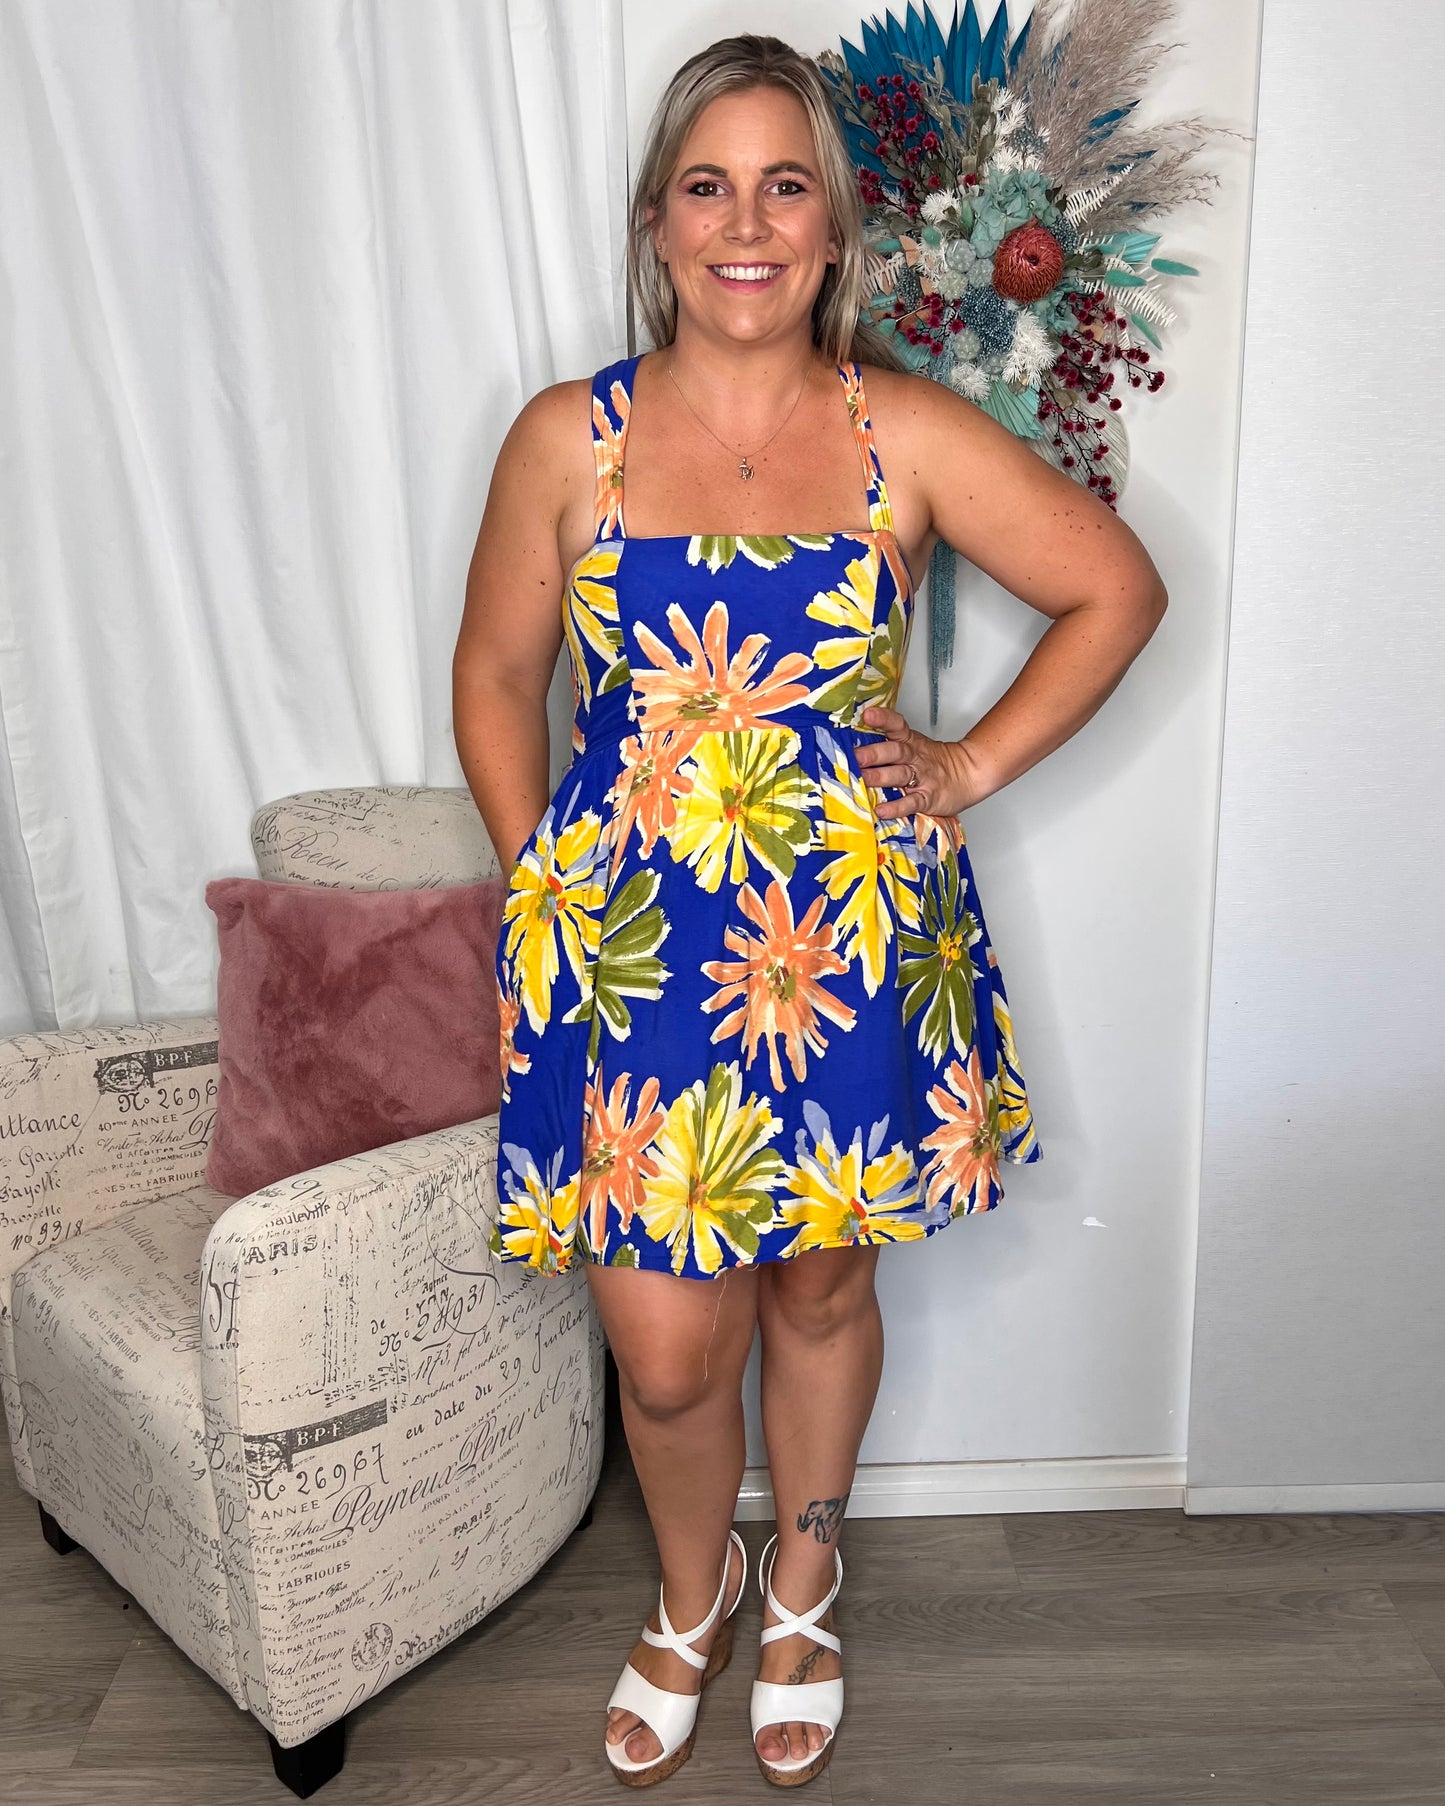 Mae Dress: This sweet little summer dress will brighten the day of everyone around you
Features:

Shirred panels at side for adjustable bust
Convertible back - wear it in a mul - Ciao Bella Dresses - Iris Maxi